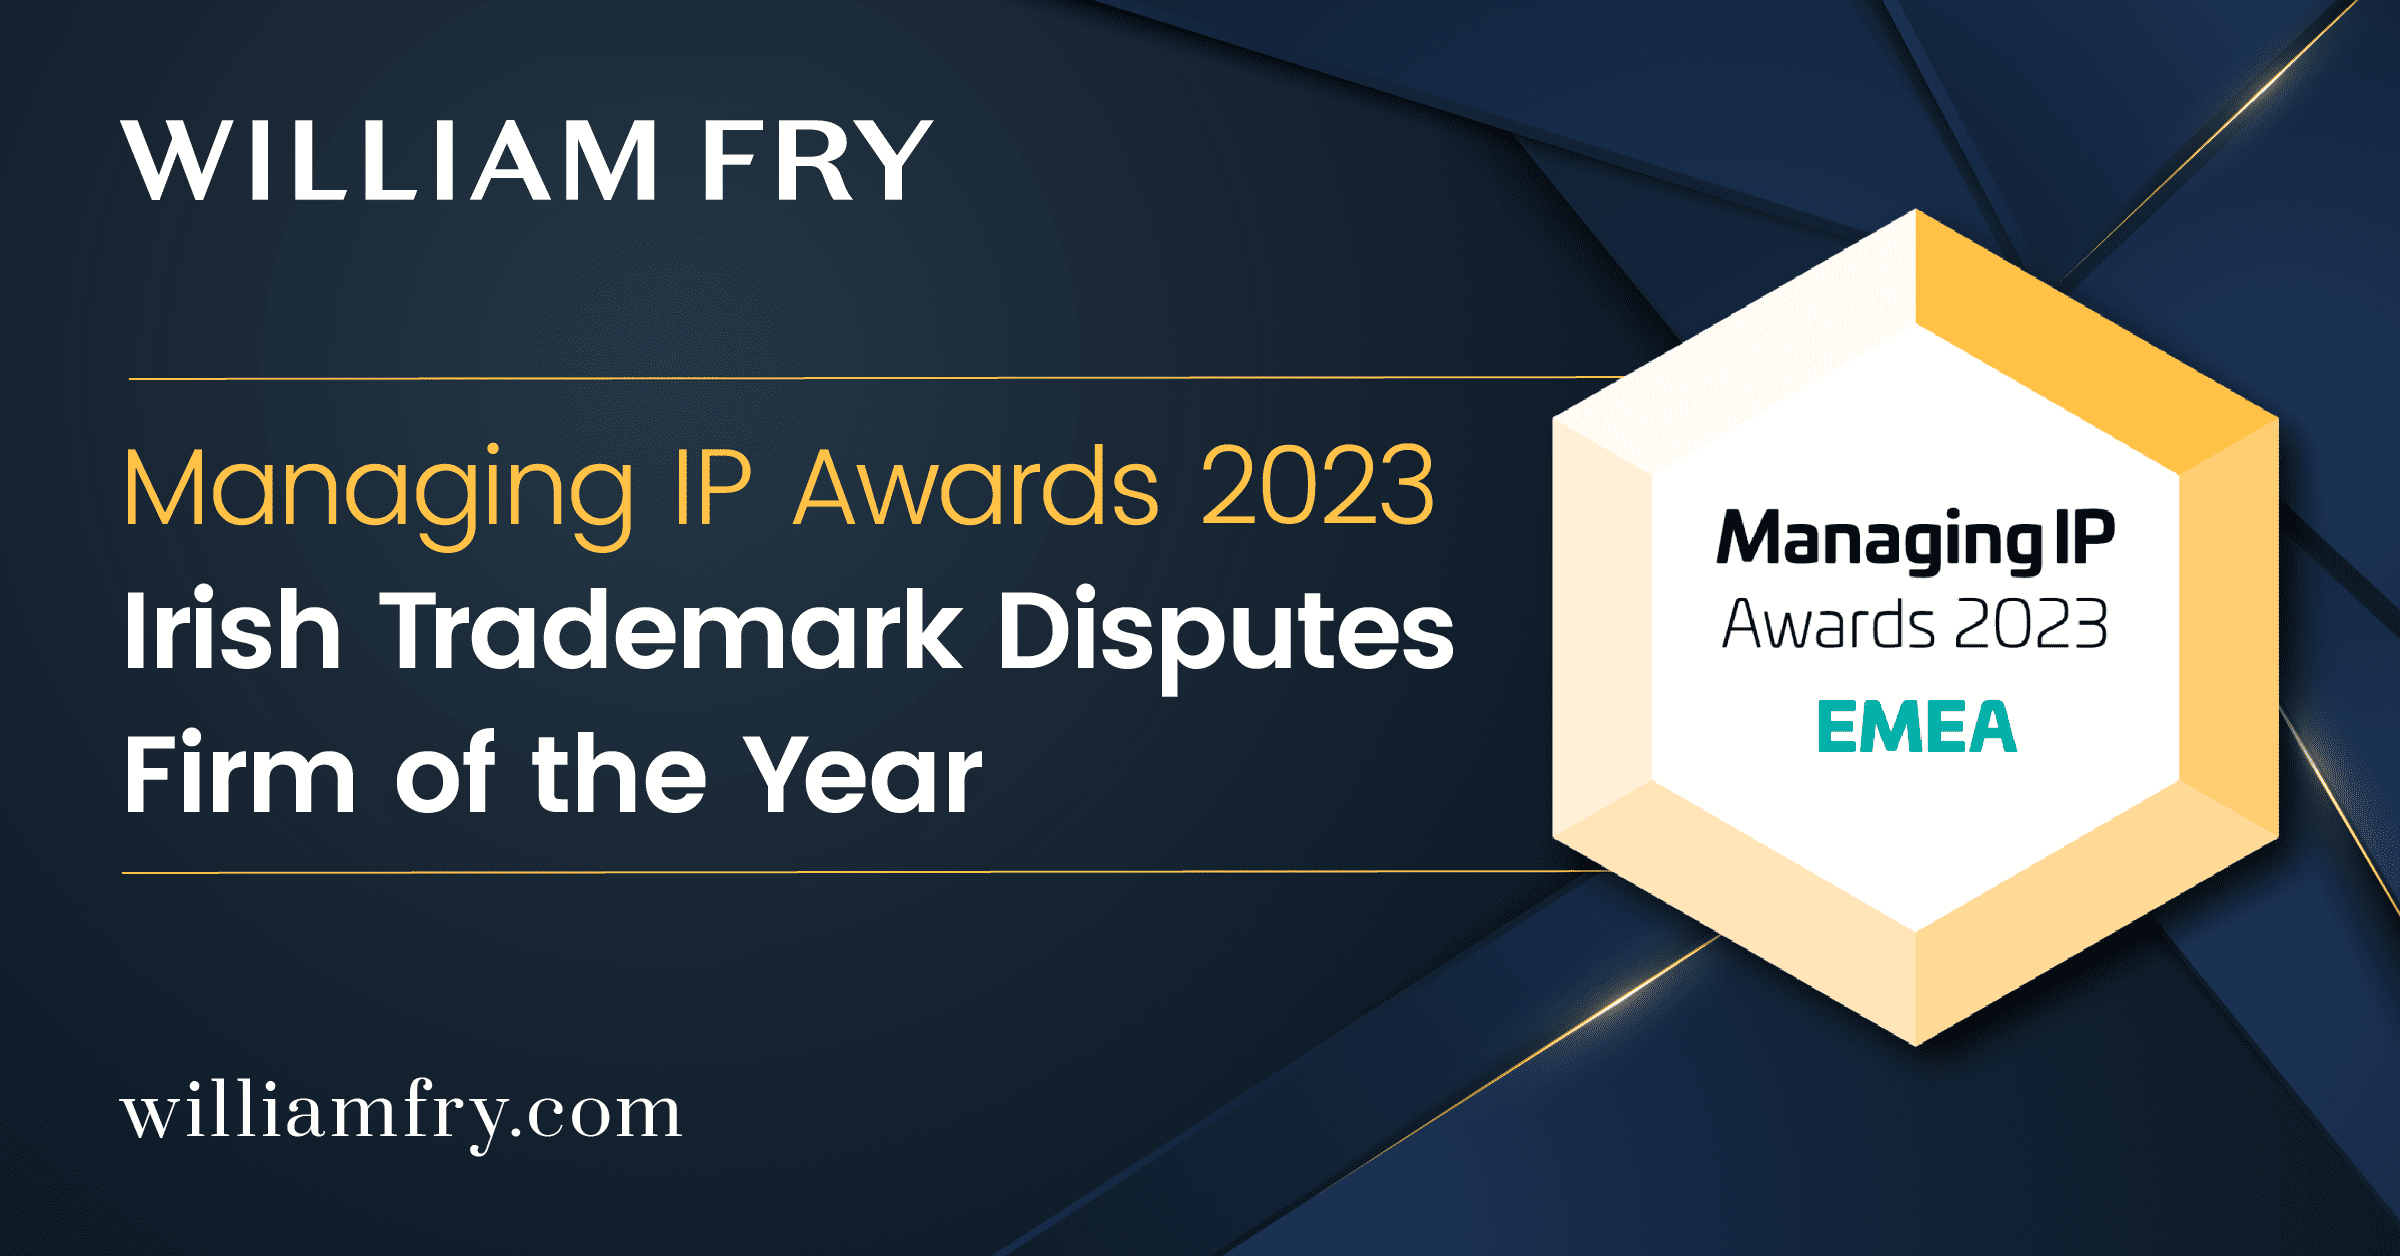 William Fry Awarded Irish Trademark Disputes Firm of the Year